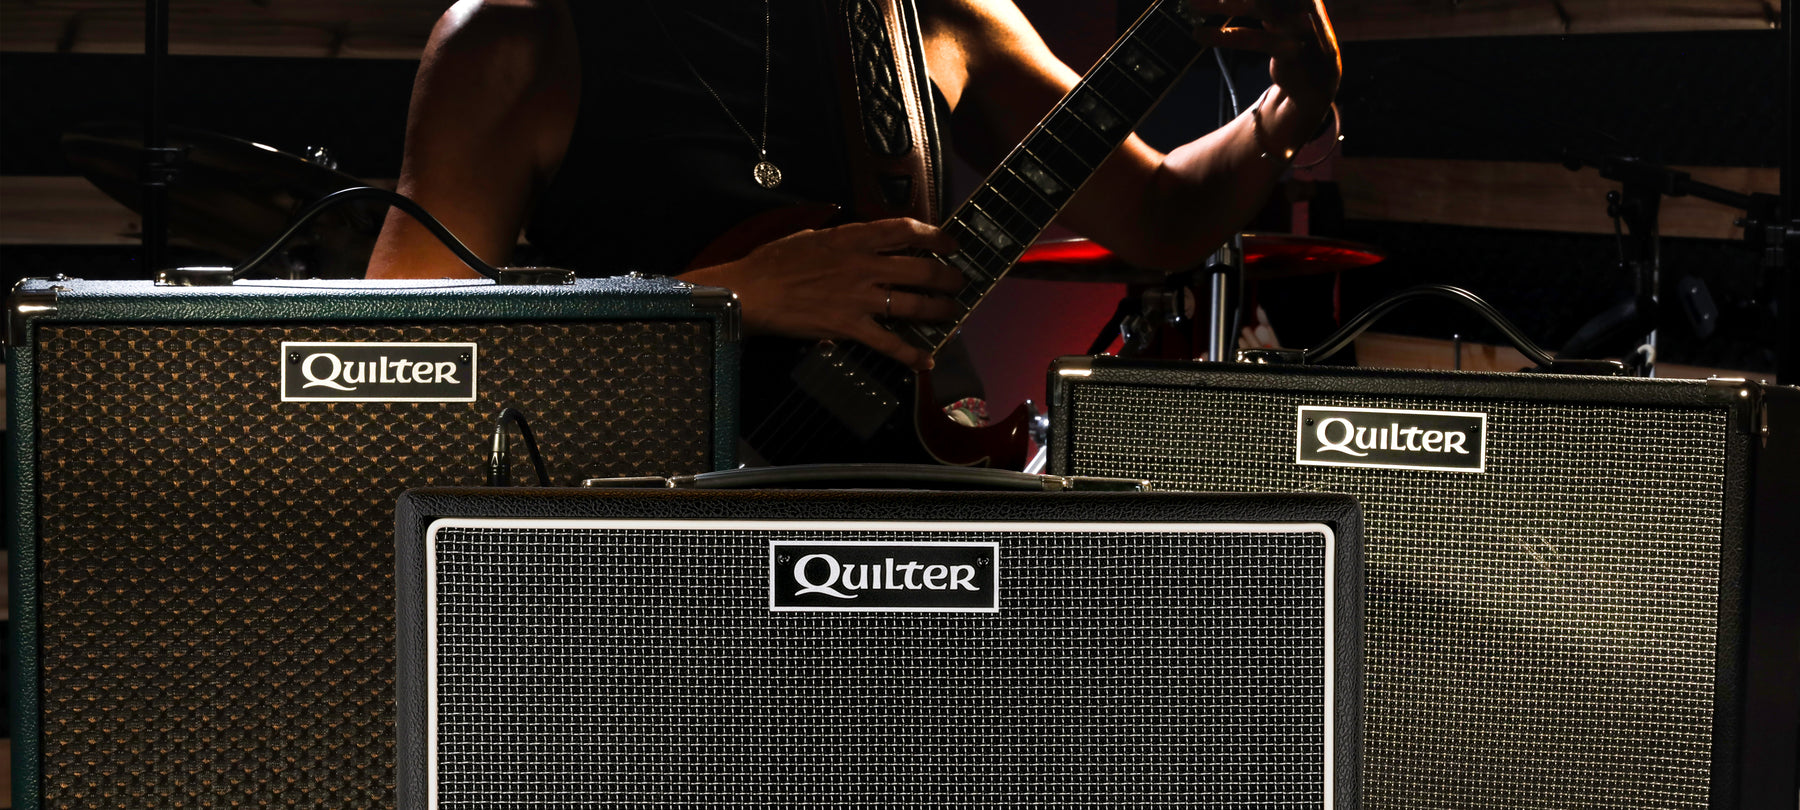 Three Quilter Labs amplifiers with female guitarist standing behind them